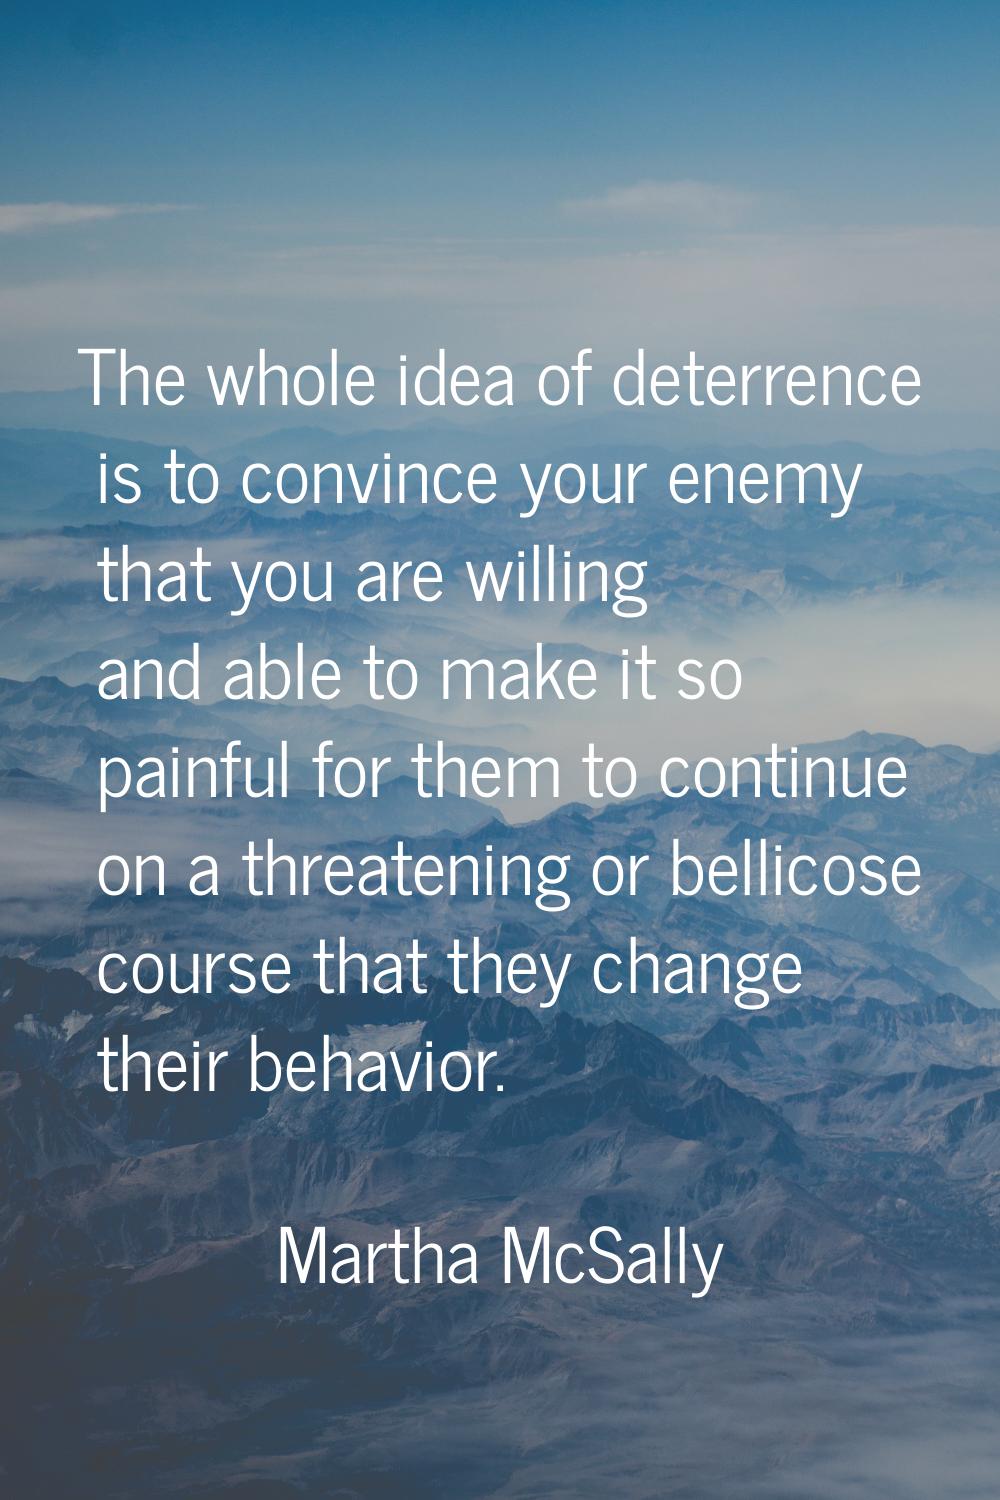 The whole idea of deterrence is to convince your enemy that you are willing and able to make it so 